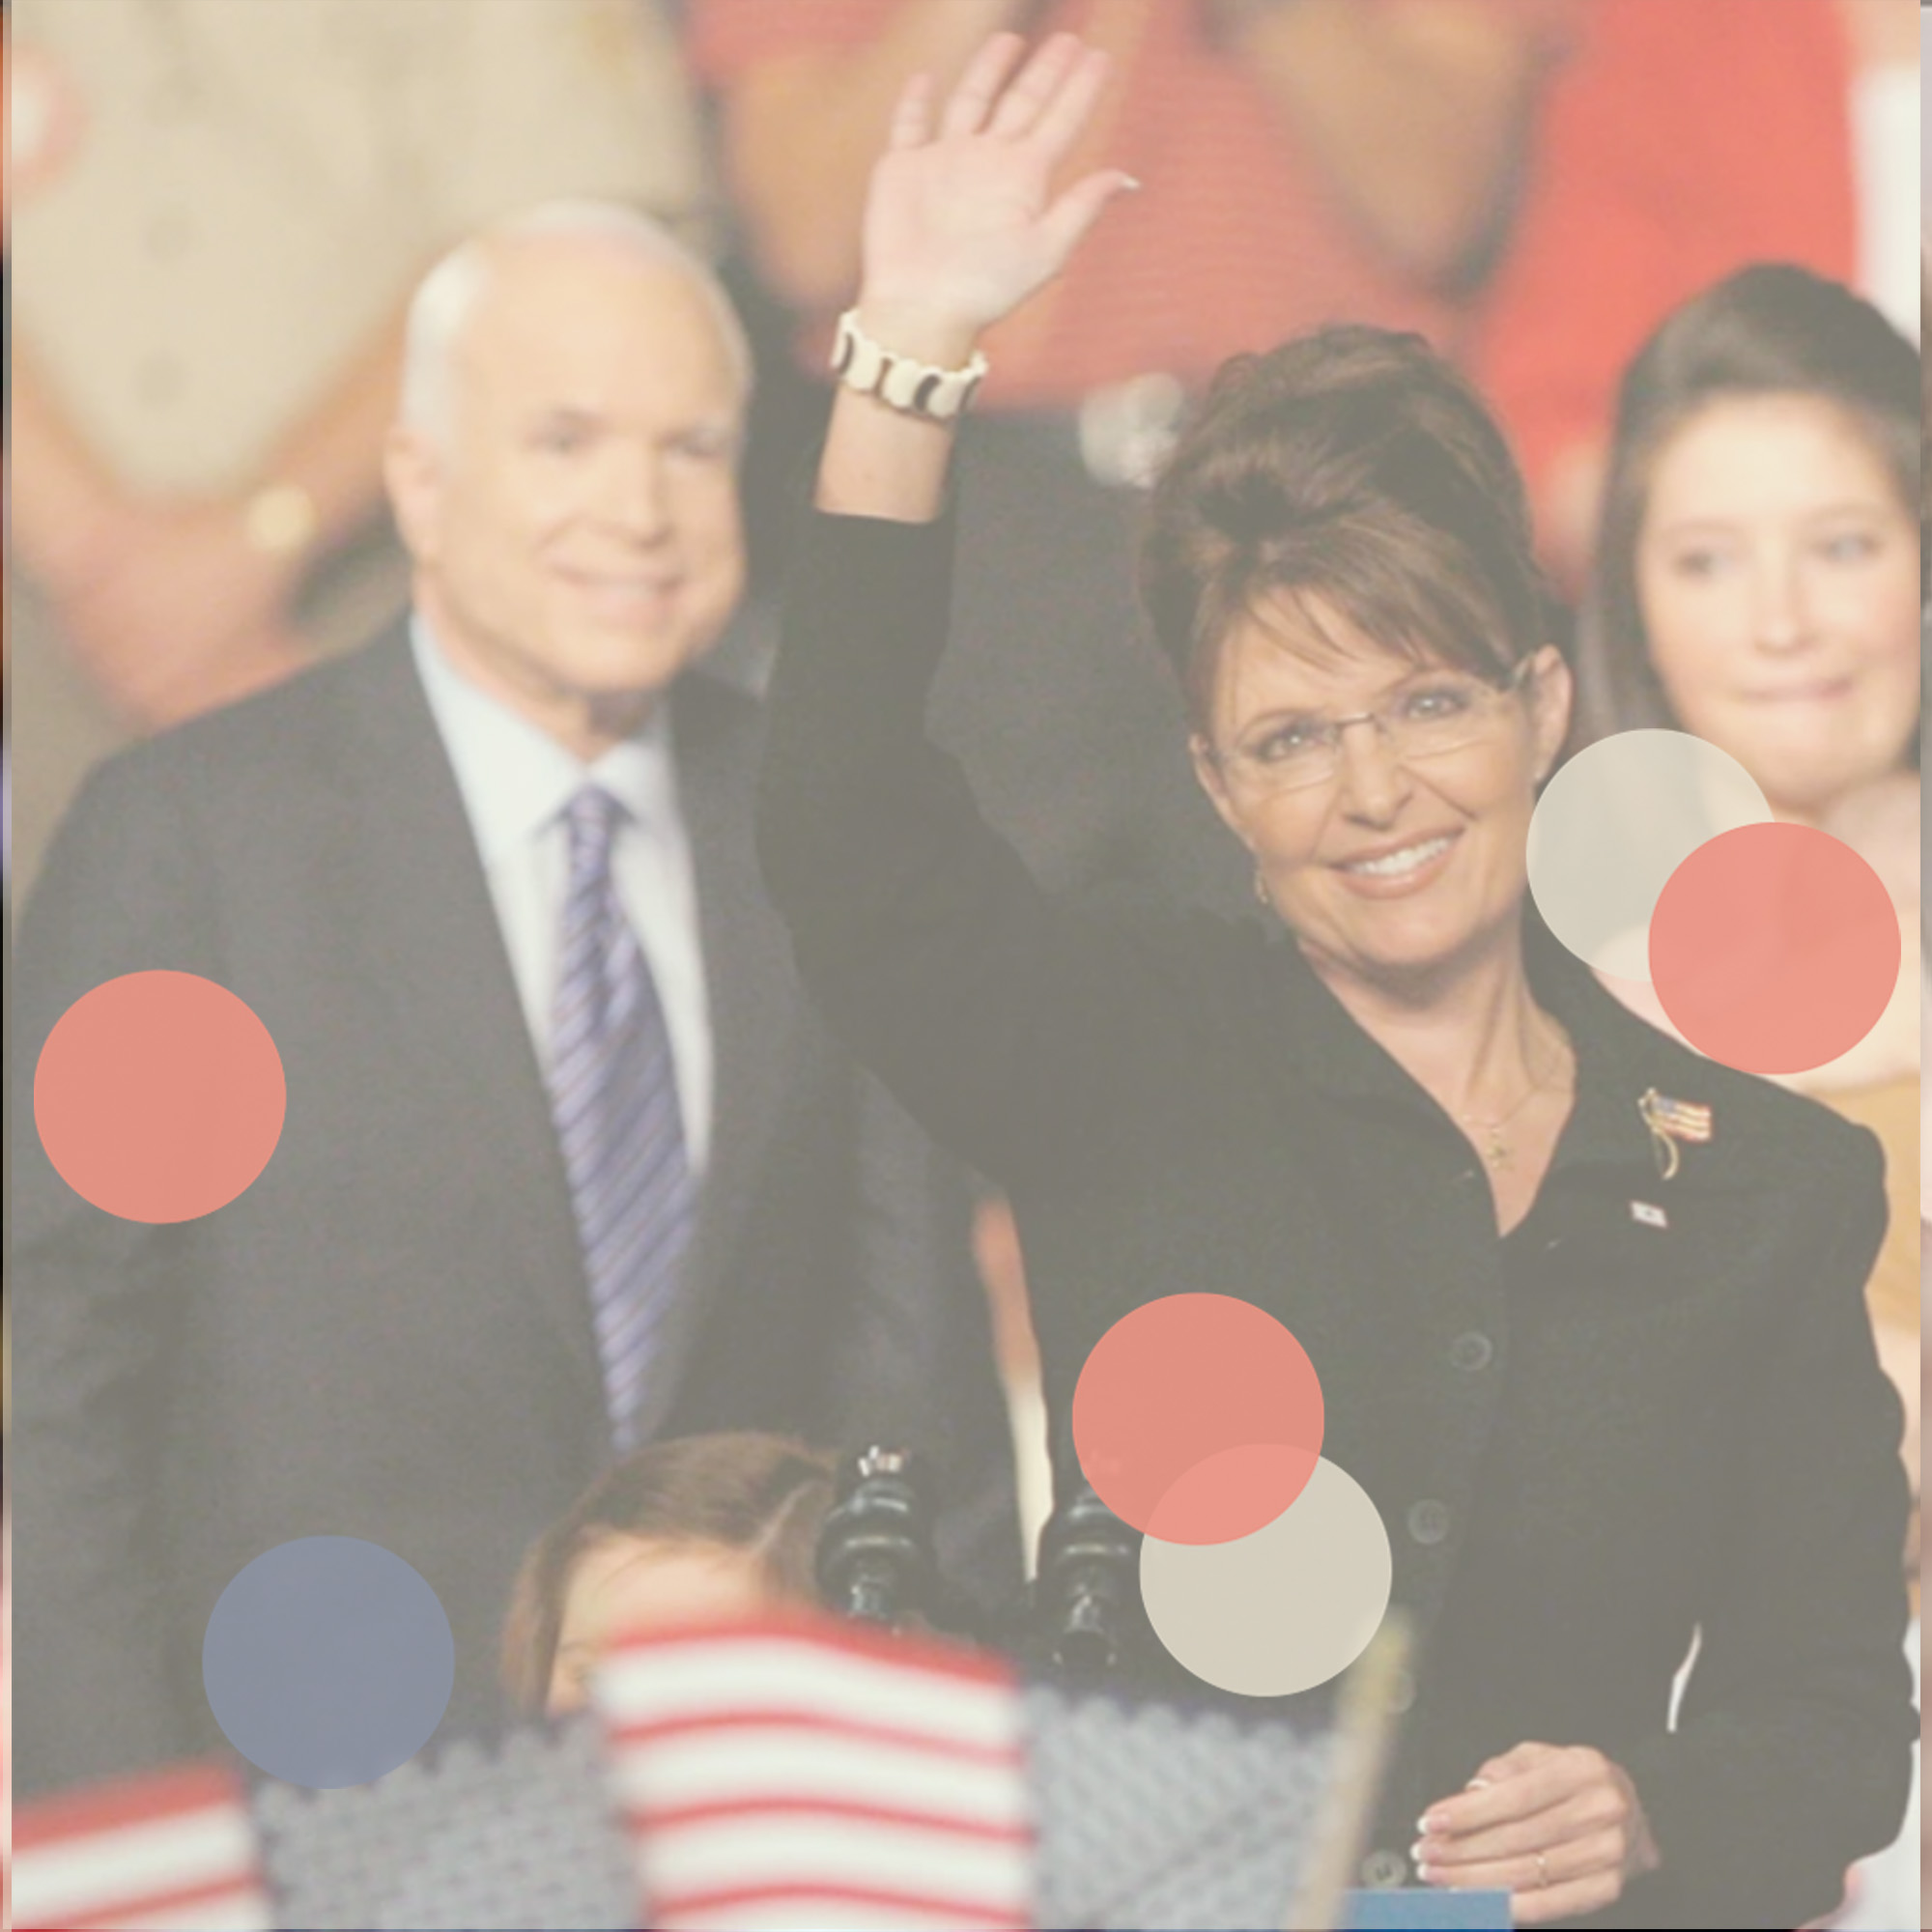 Veepstakes Week: The Legend Of The Sarah Palin Cruise Ship (2007)